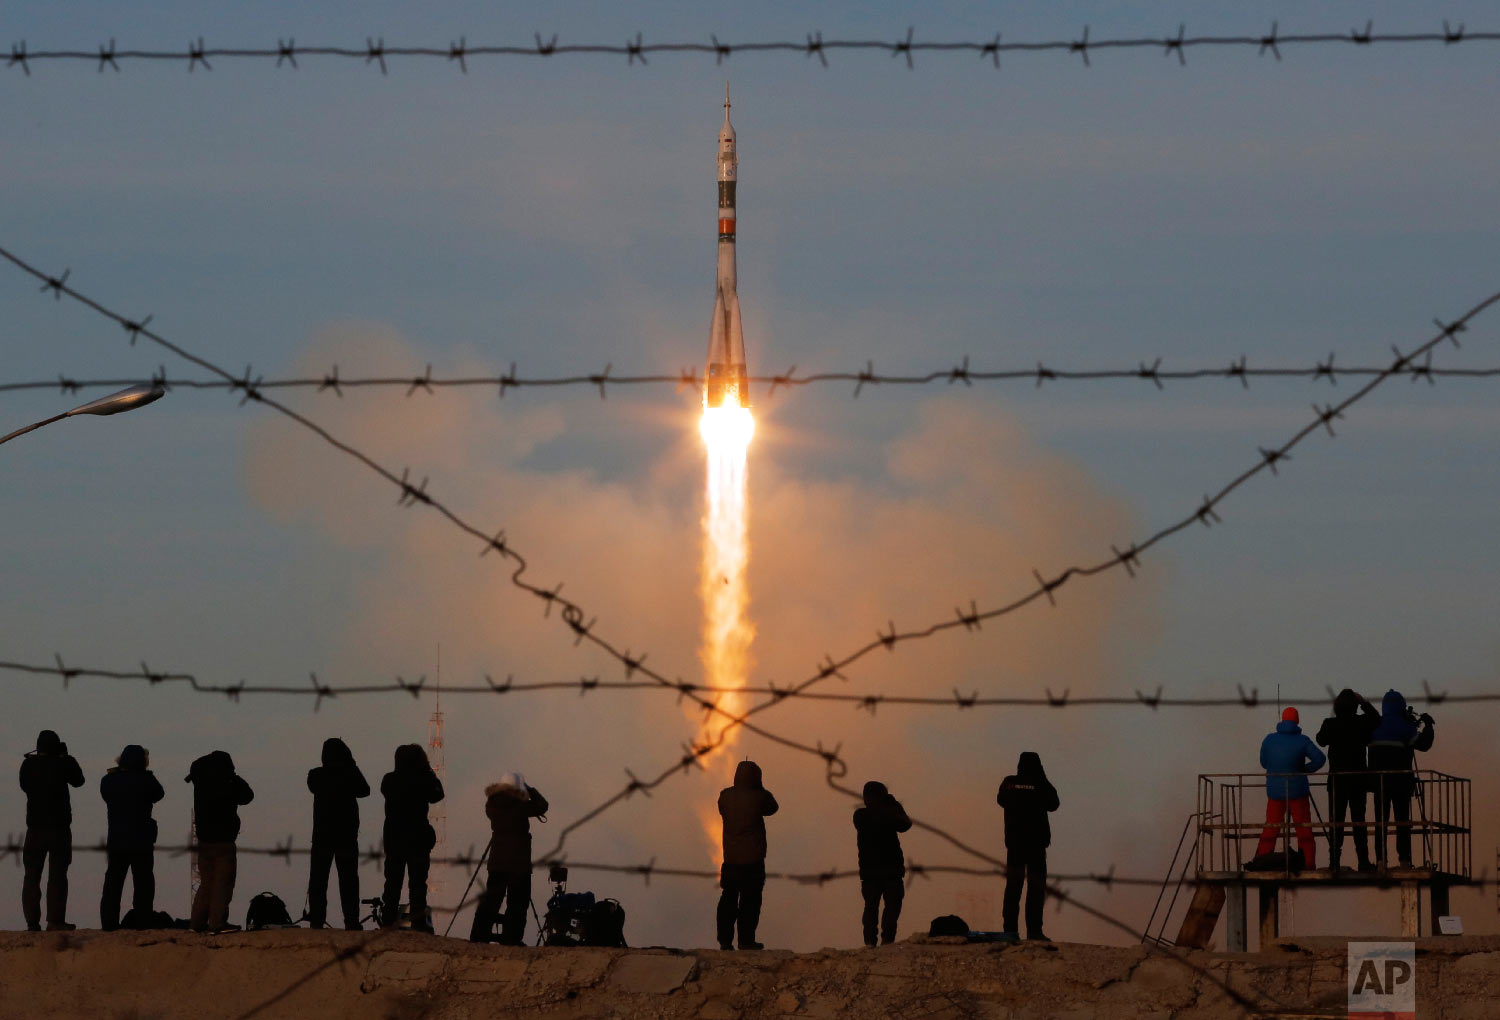  Fhe Soyuz-FG rocket booster with Soyuz MS-11 space ship carrying a new crew to the International Space Station, ISS, blasts off at the Russian leased Baikonur cosmodrome, Kazakhstan on Dec. 3, 2018. (AP Photo/Dmitri Lovetsky) 